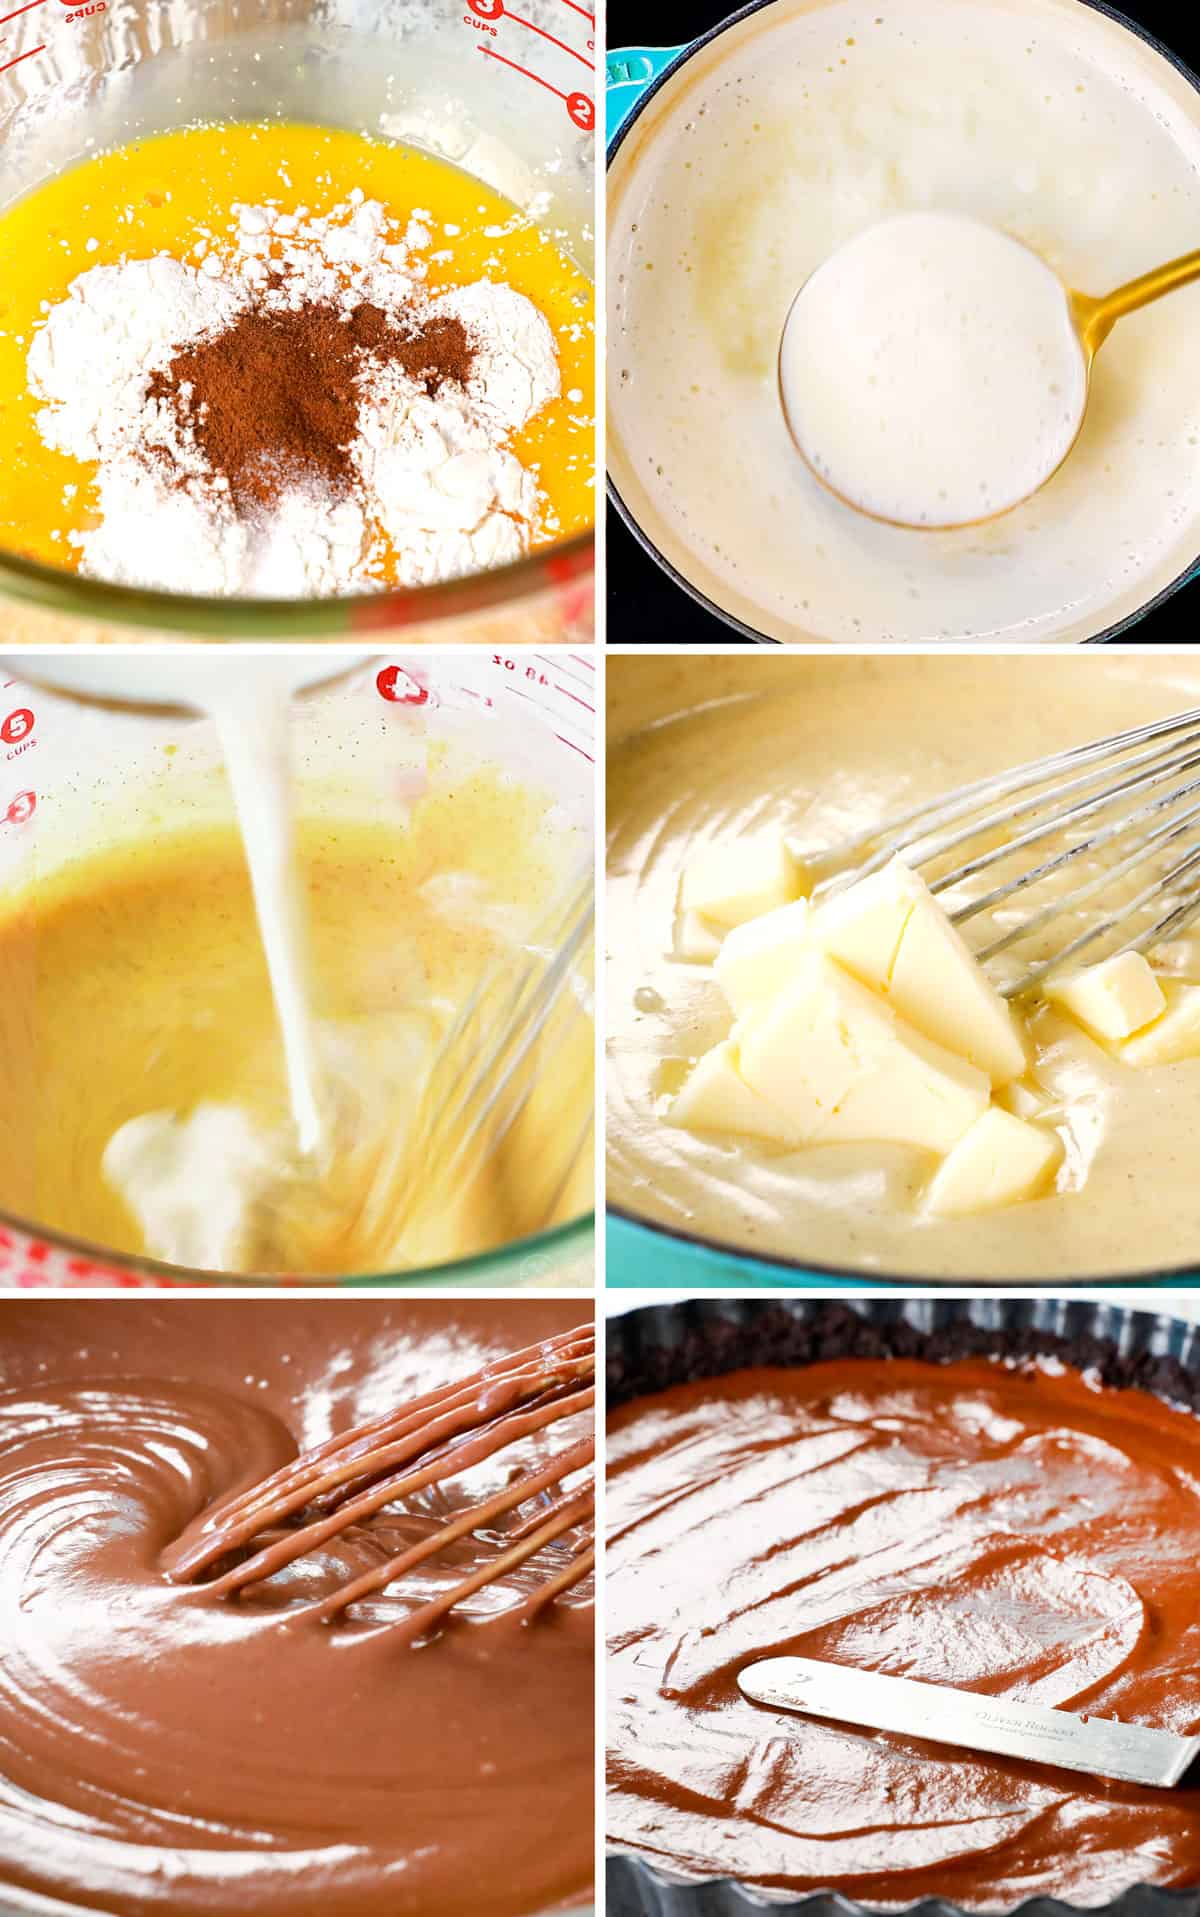 a collage showing how to make chocolate cream pie recipe by whisking egg yolks together with cornstarch, simmering half and half and sugar, tempering the eggs, melting butter in the custard, melting chocolate in the custard, adding the custard filling to the pie shell